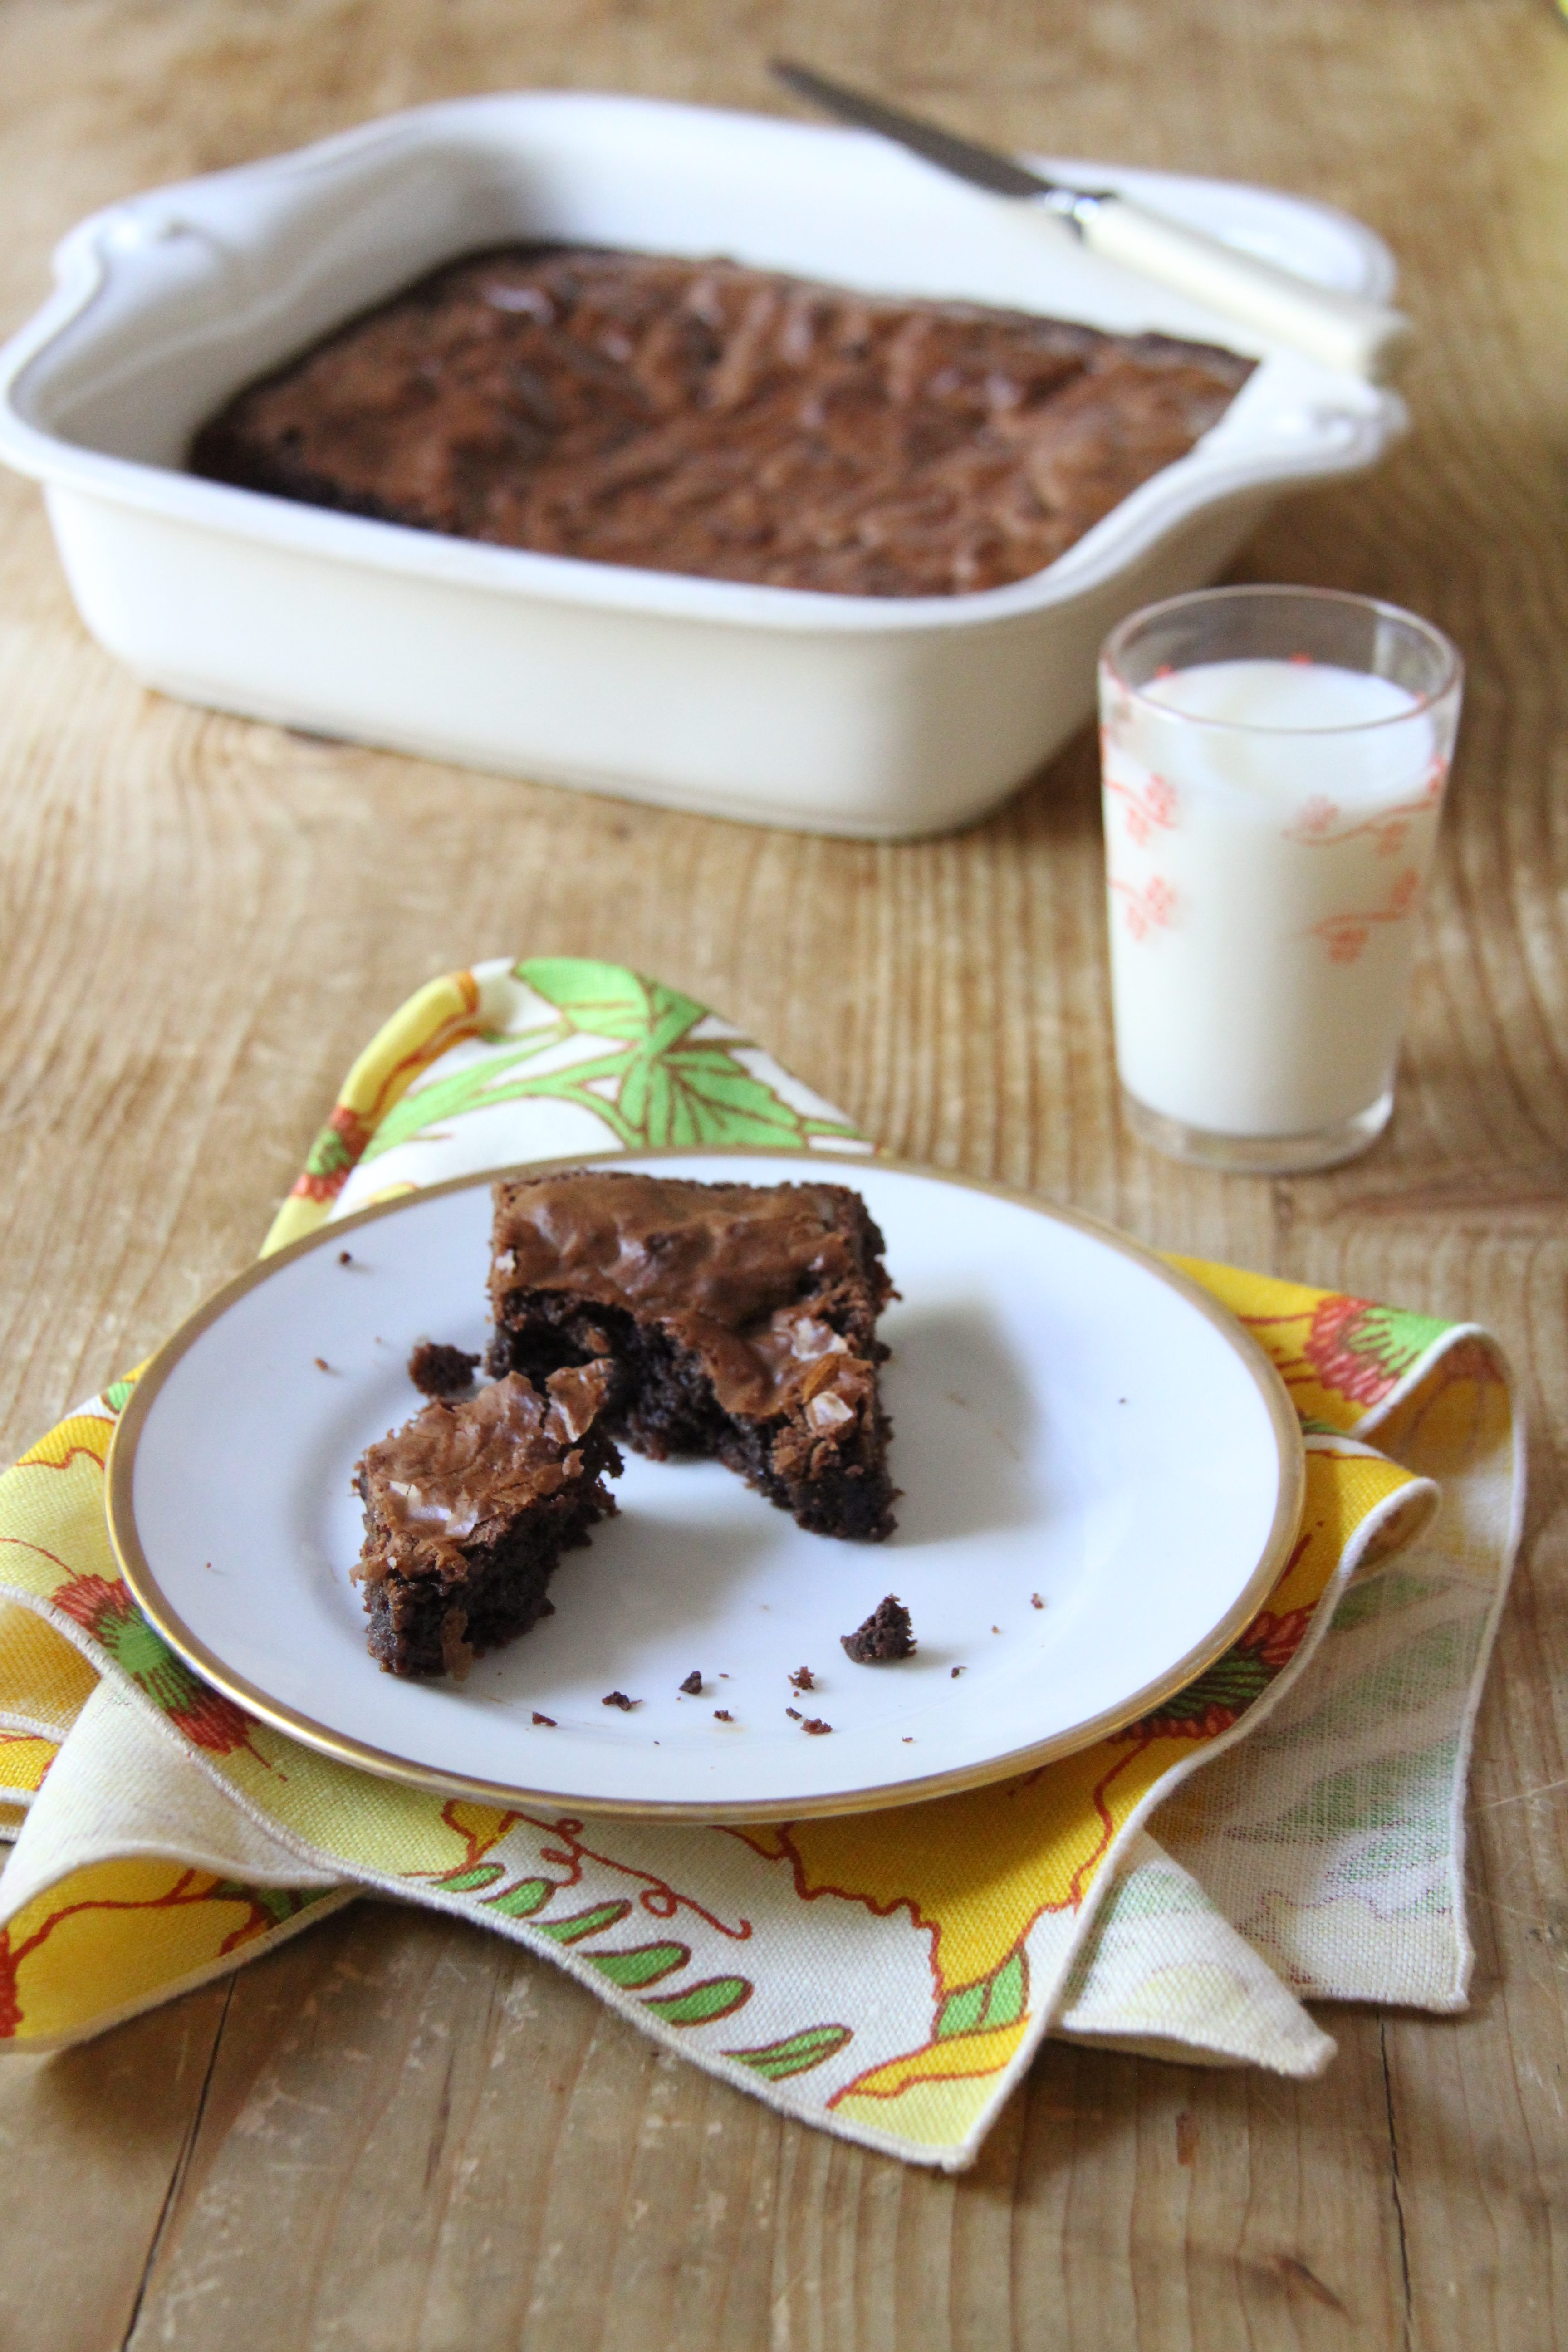 These are the best homemade brownies with a gooey chocolate center and flakey top, delicious with a cold glass of milk or alone!